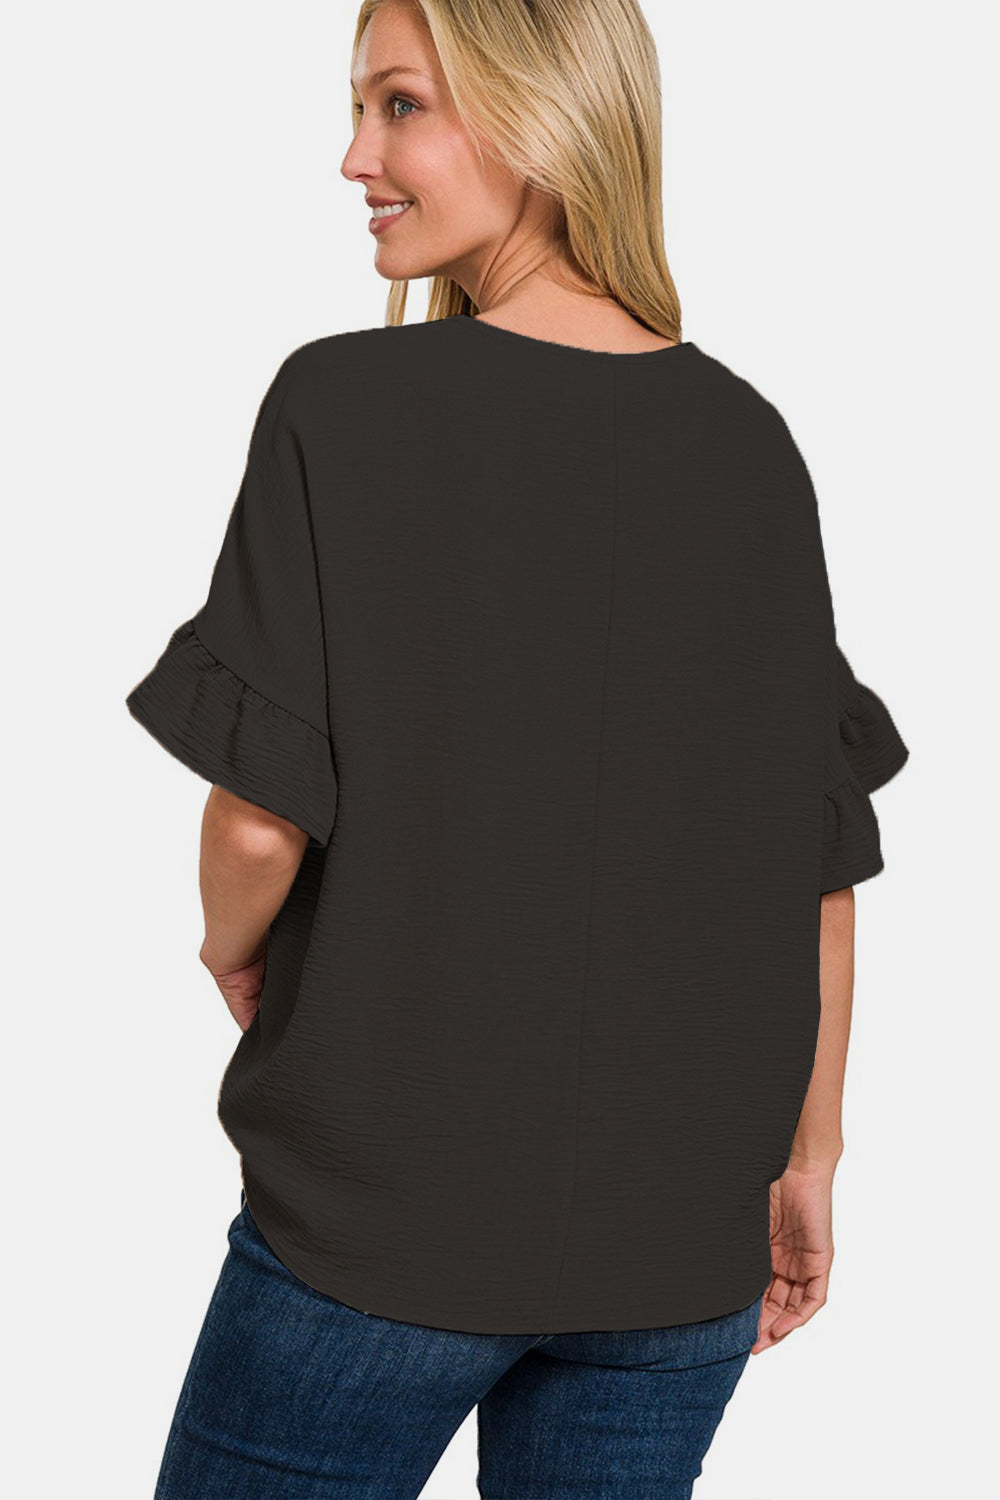 Zenana V-Neck Flutter Sleeve Top-100 Short Sleeve Tops-Inspired by Justeen-Women's Clothing Boutique in Chicago, Illinois